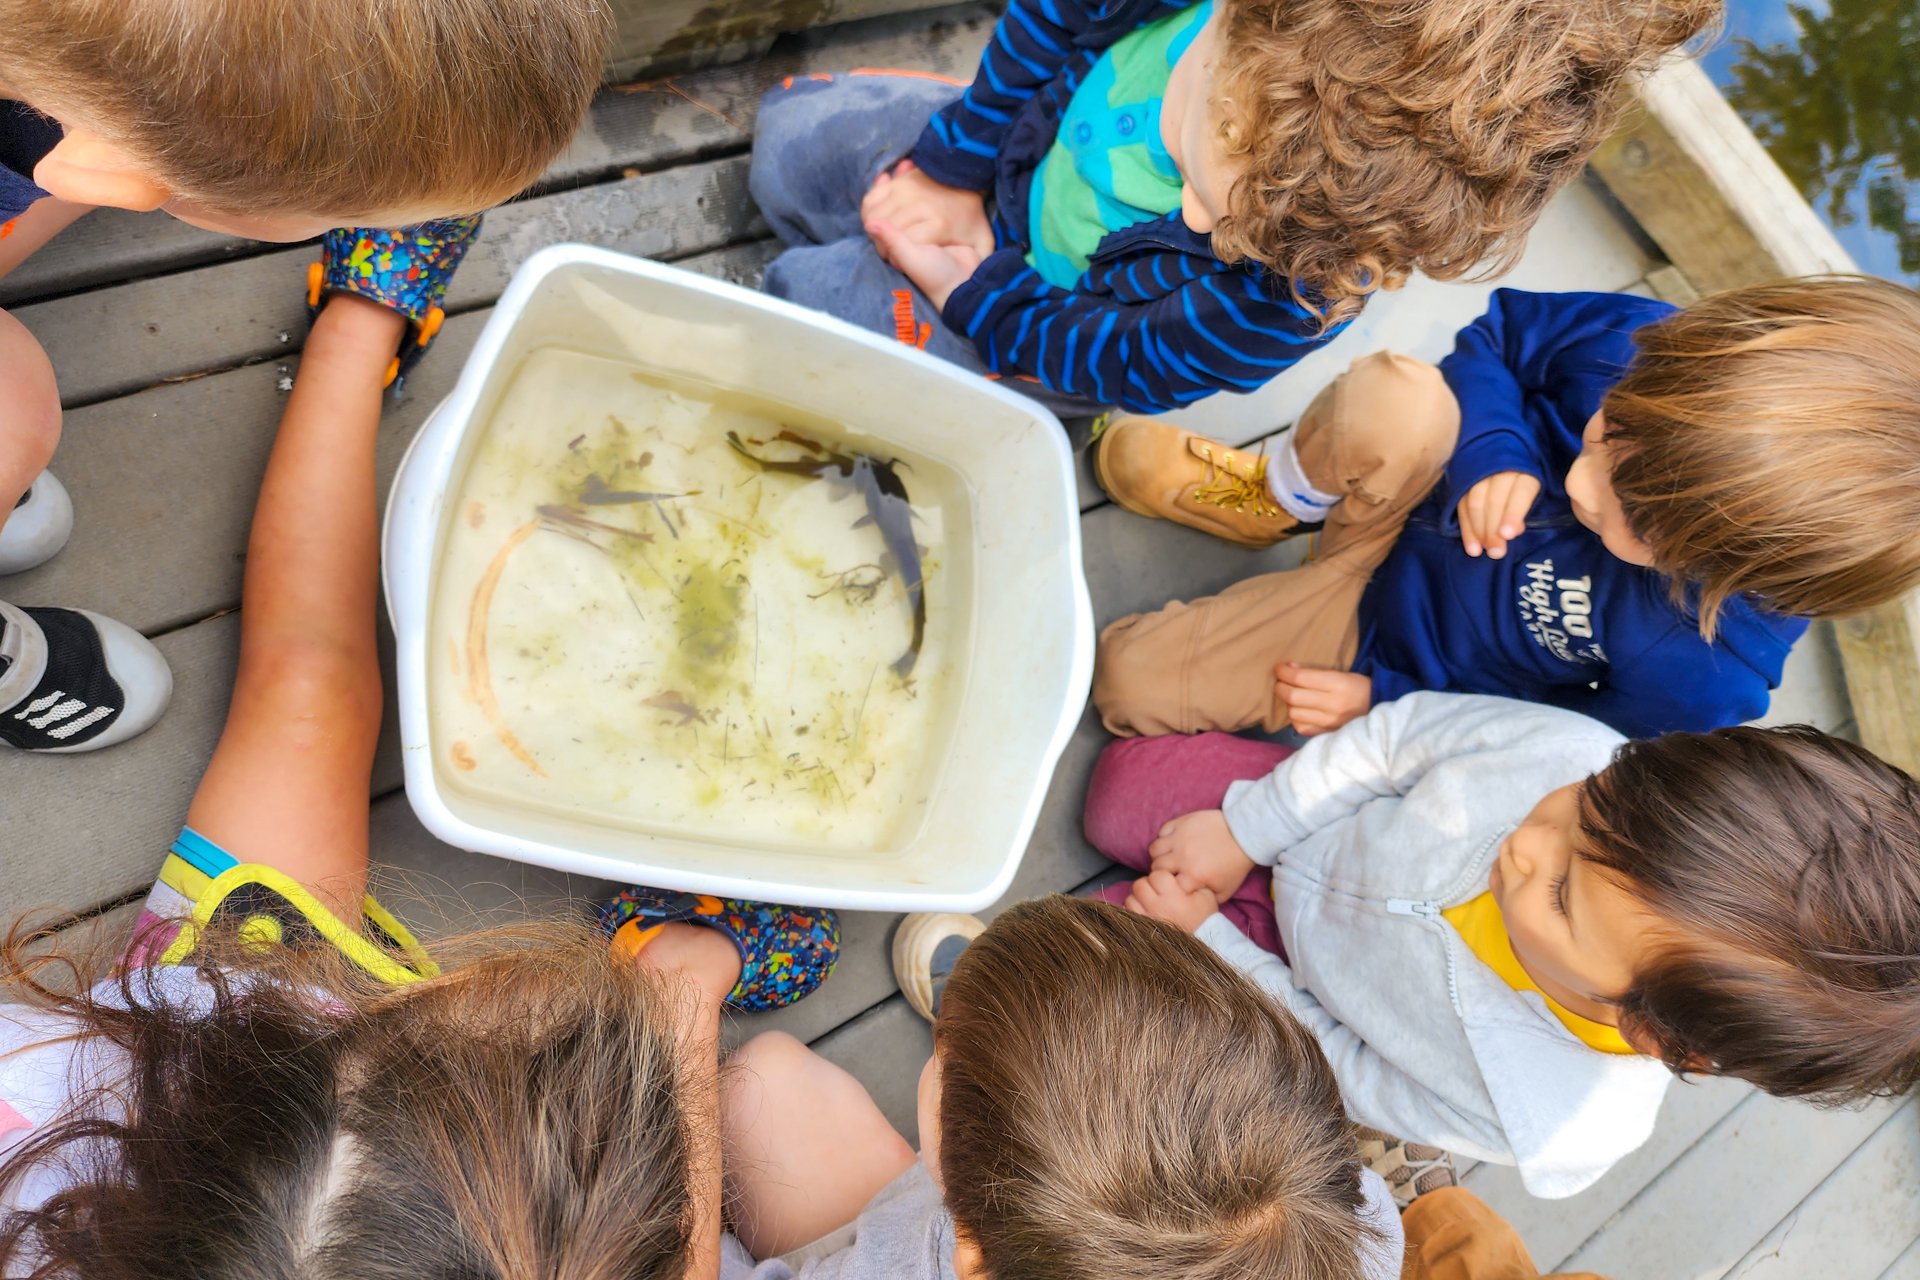 A group of Berkshire Nature Camp campers huddled around a white bin that contains pond water and a live fish